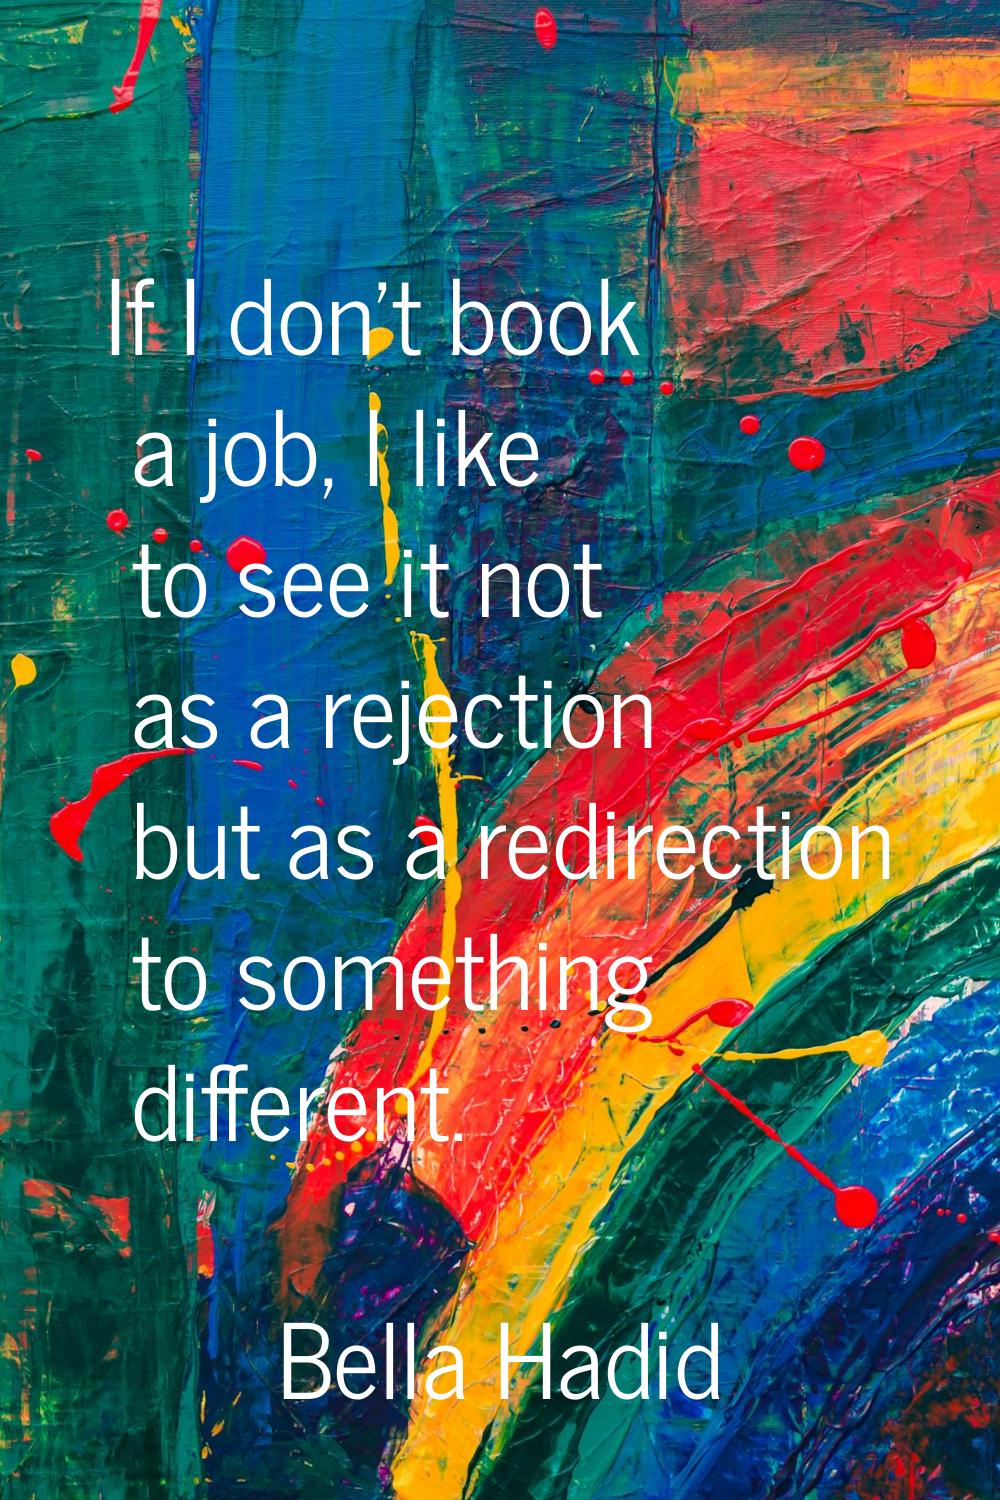 If I don't book a job, I like to see it not as a rejection but as a redirection to something differ